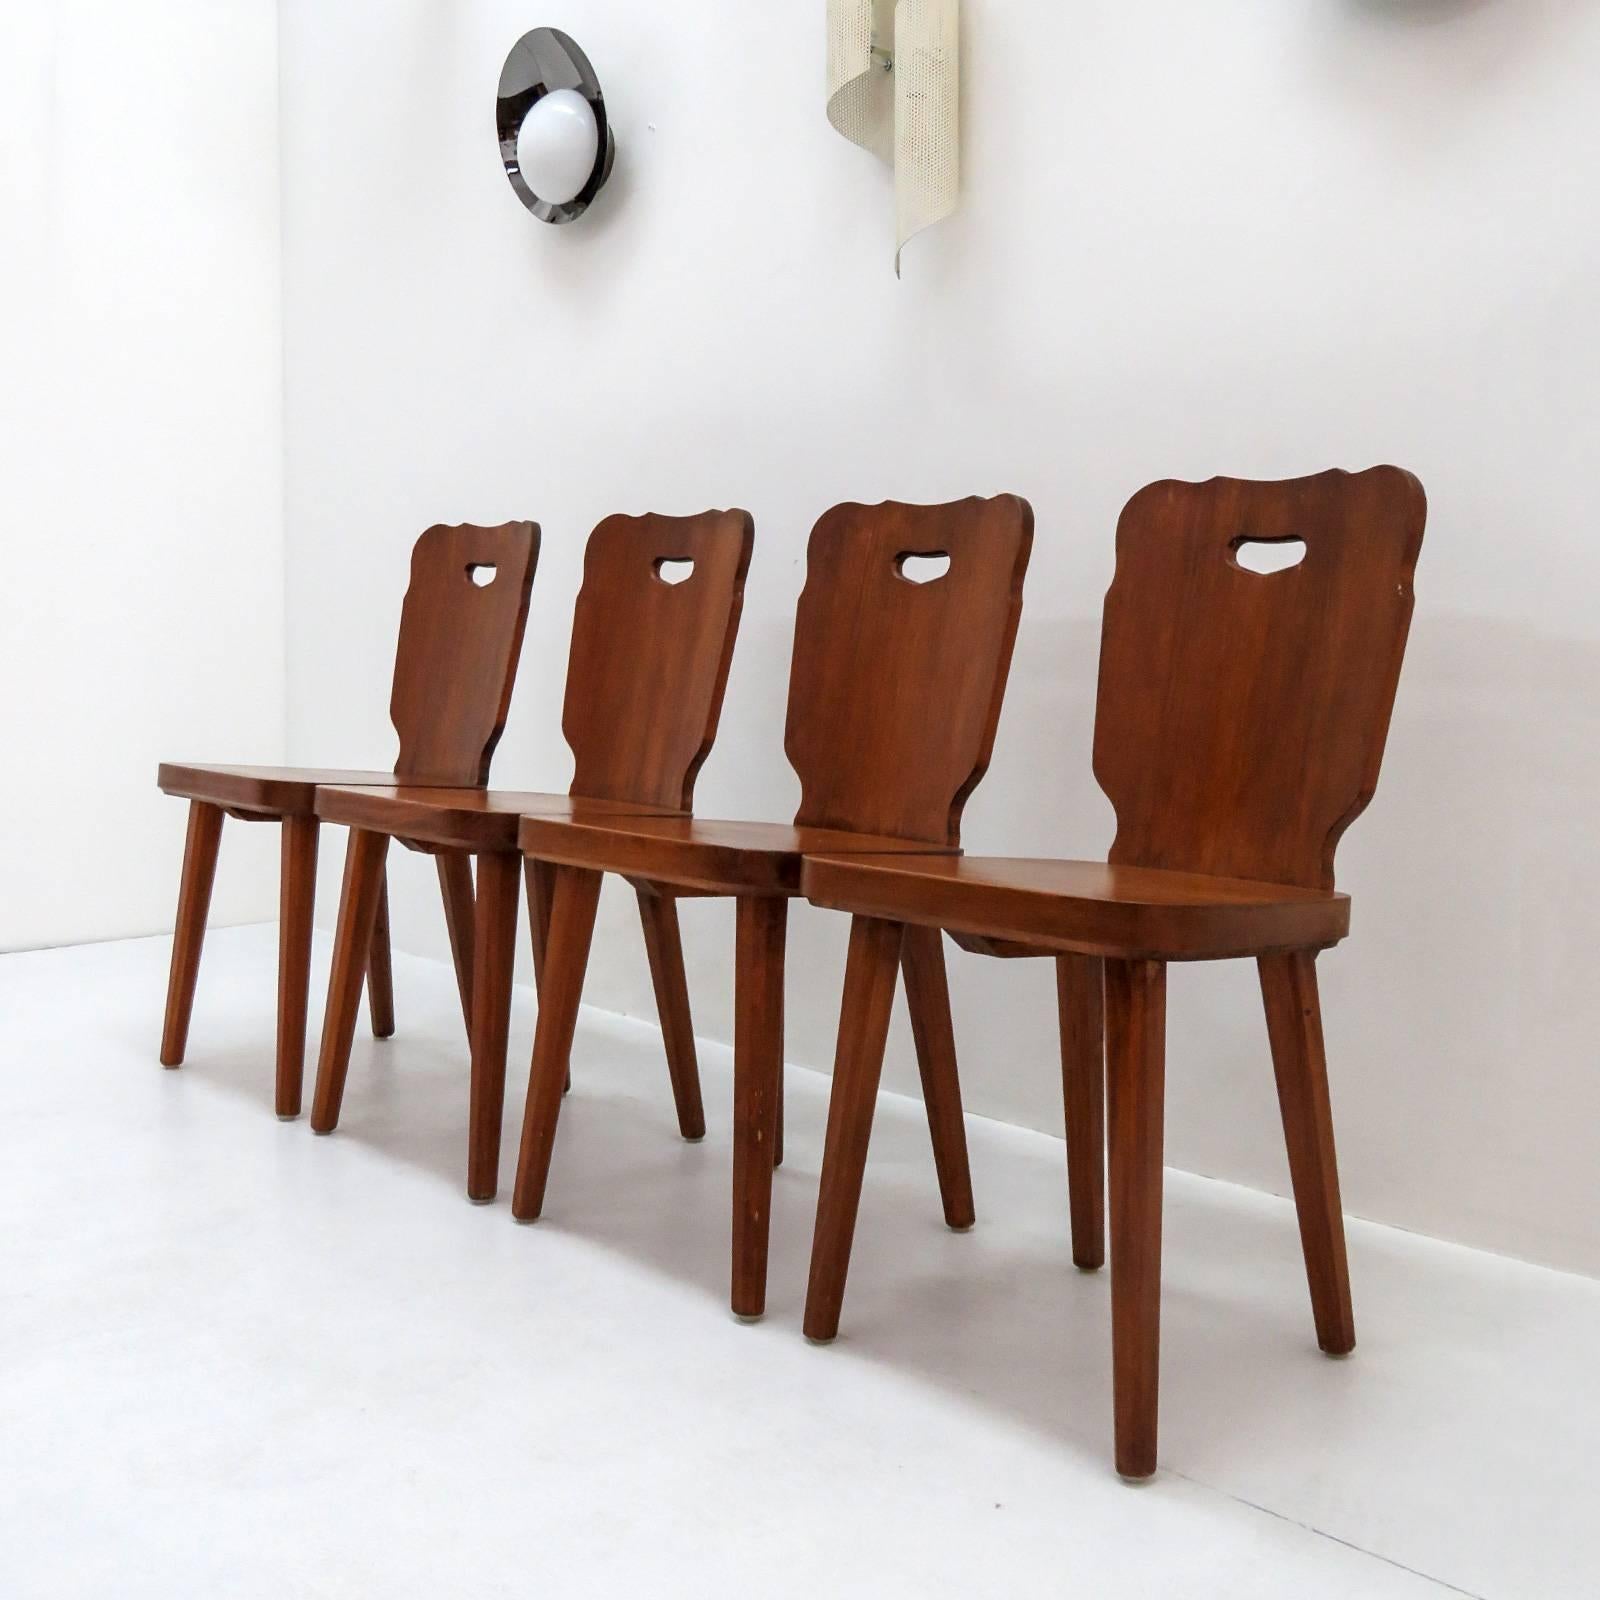 Set of Four Rustic Wooden Chairs 3